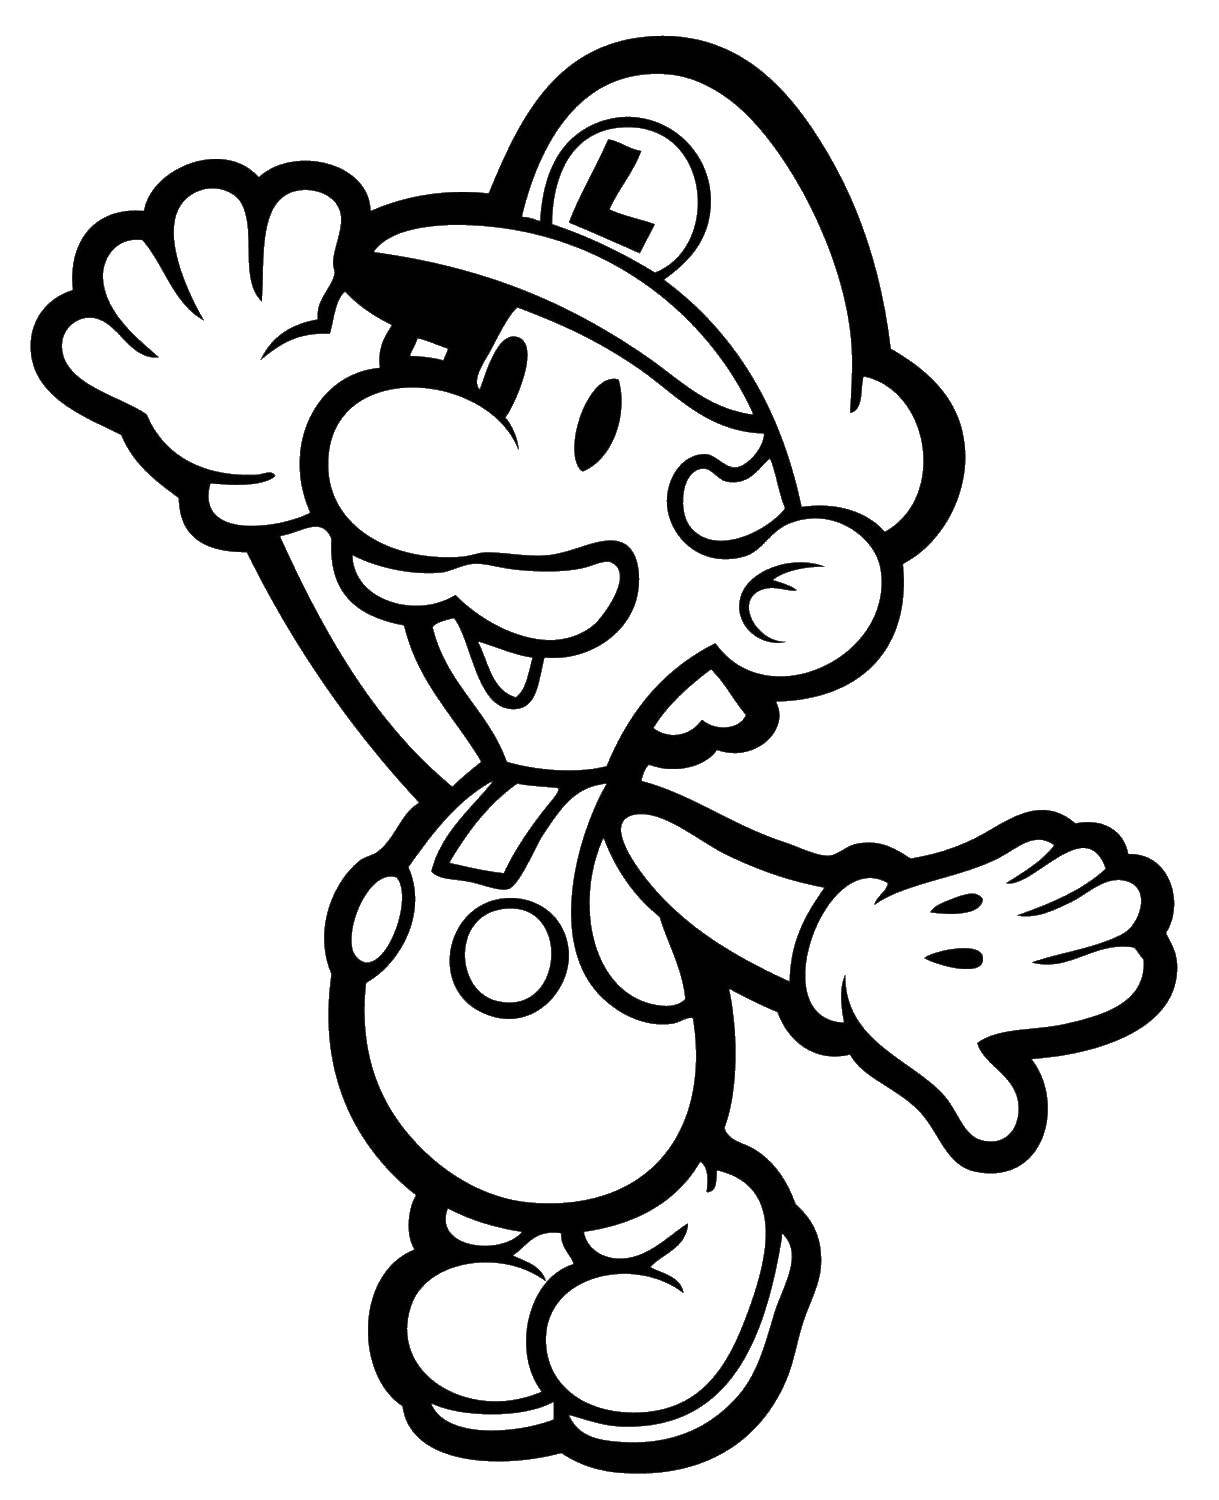 Coloring The character of the game Luigi. Category The character from the game. Tags:  Games, Mario.